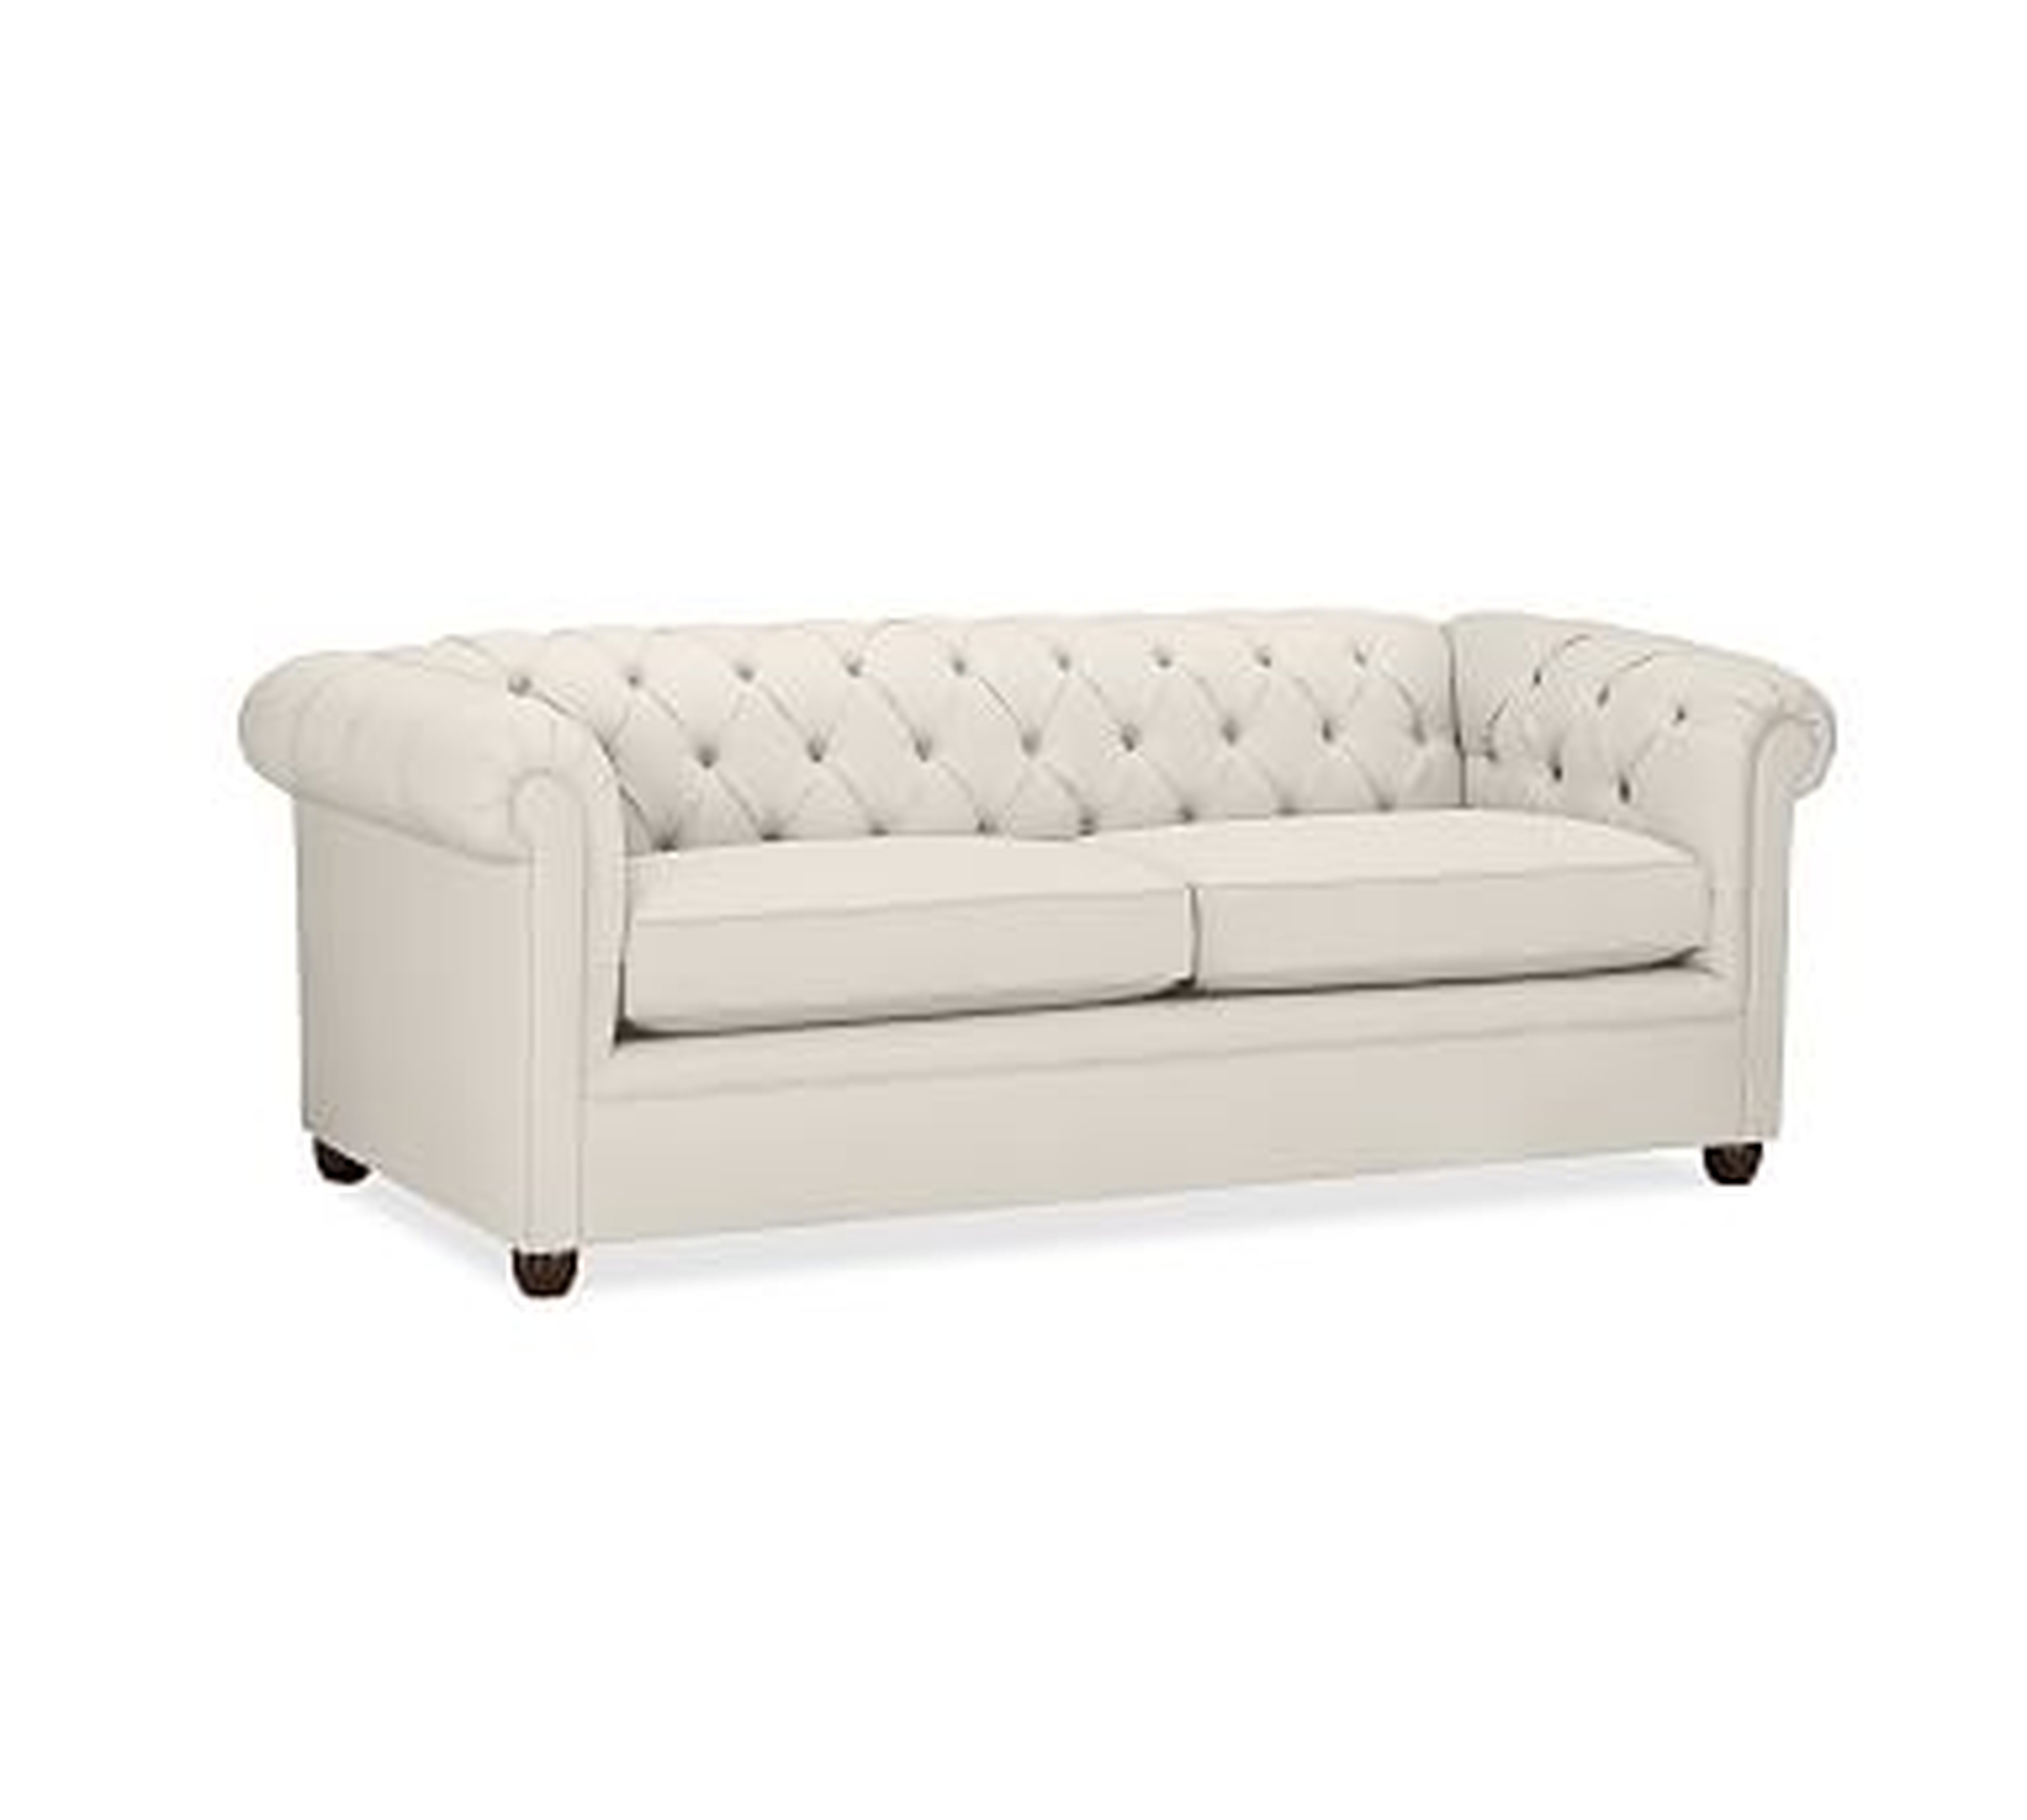 Chesterfield Upholstered Sofa 86", Polyester Wrapped Cushions, Twill Cream - Pottery Barn